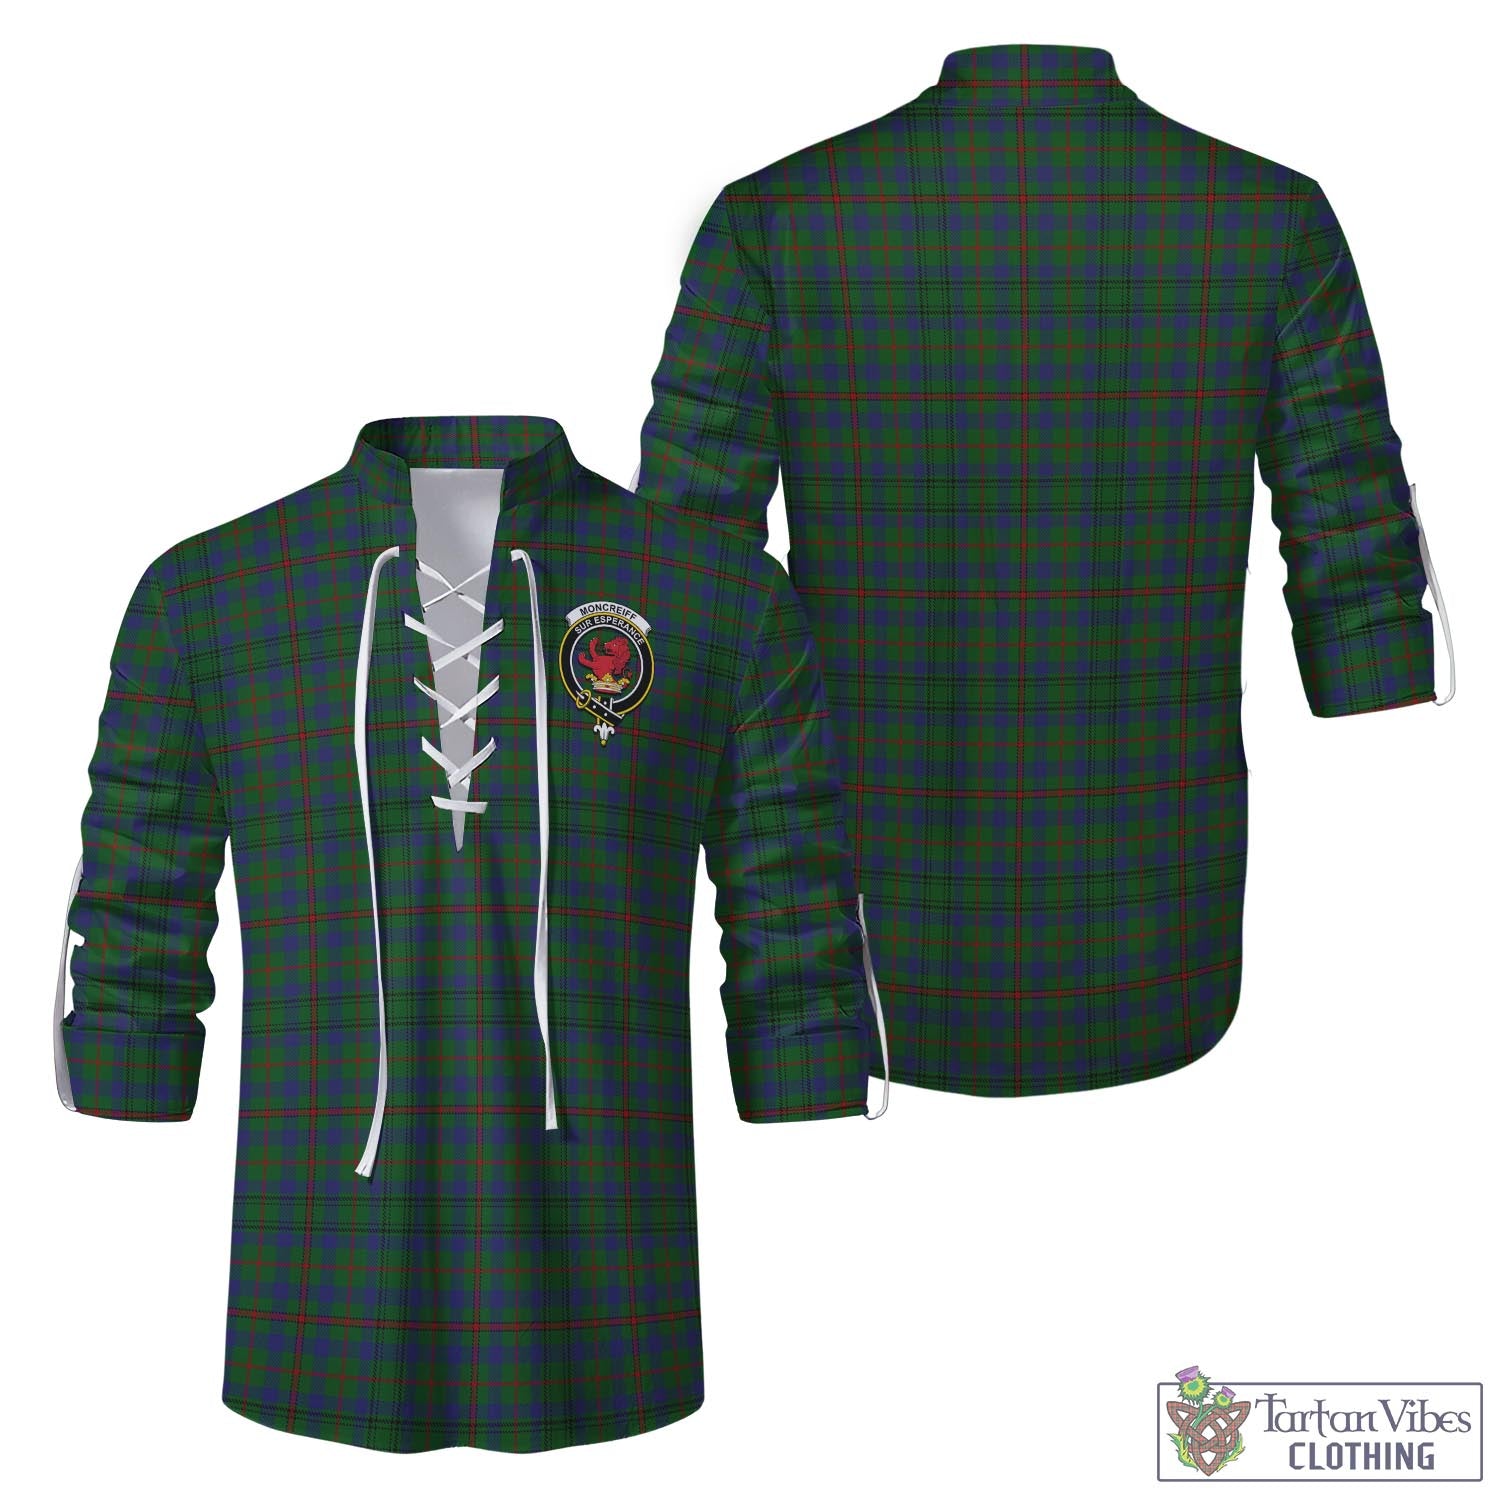 Tartan Vibes Clothing Moncrieff of Atholl Tartan Men's Scottish Traditional Jacobite Ghillie Kilt Shirt with Family Crest